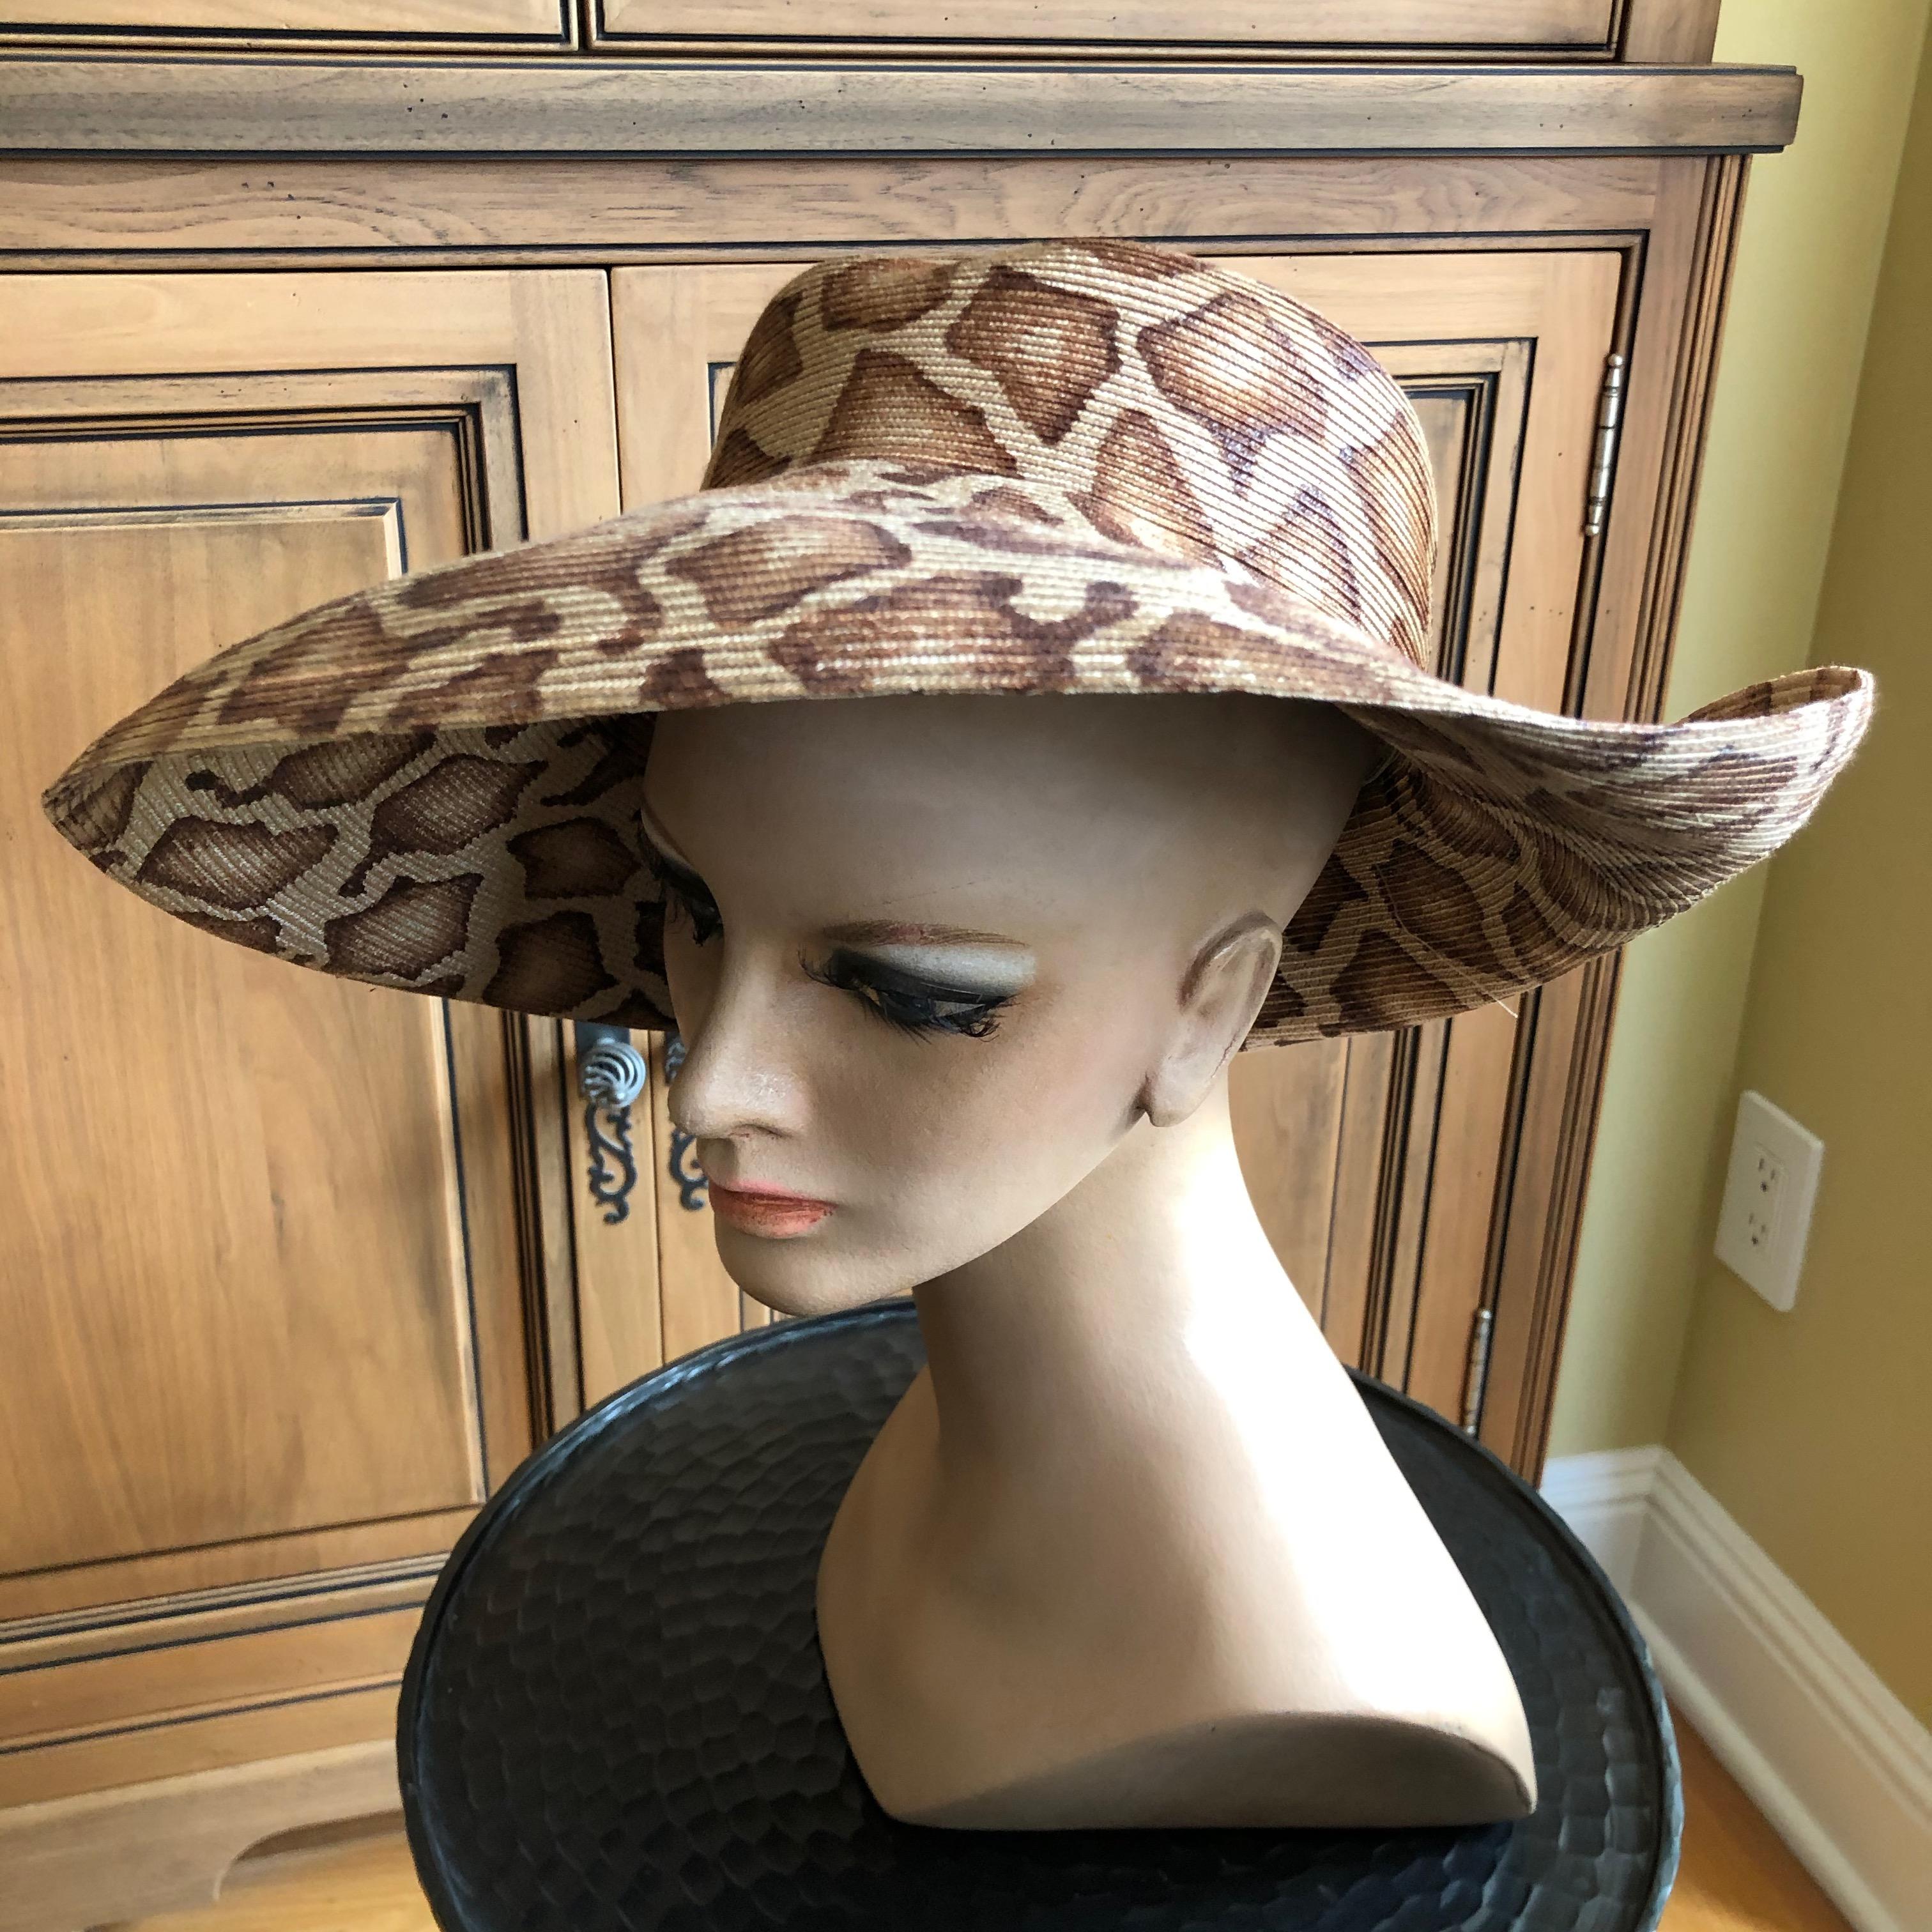 Eric Javits Wide Brim Giraffe Print Straw Hat
22.5 inch circumfrence.
In excellent pre owned condition